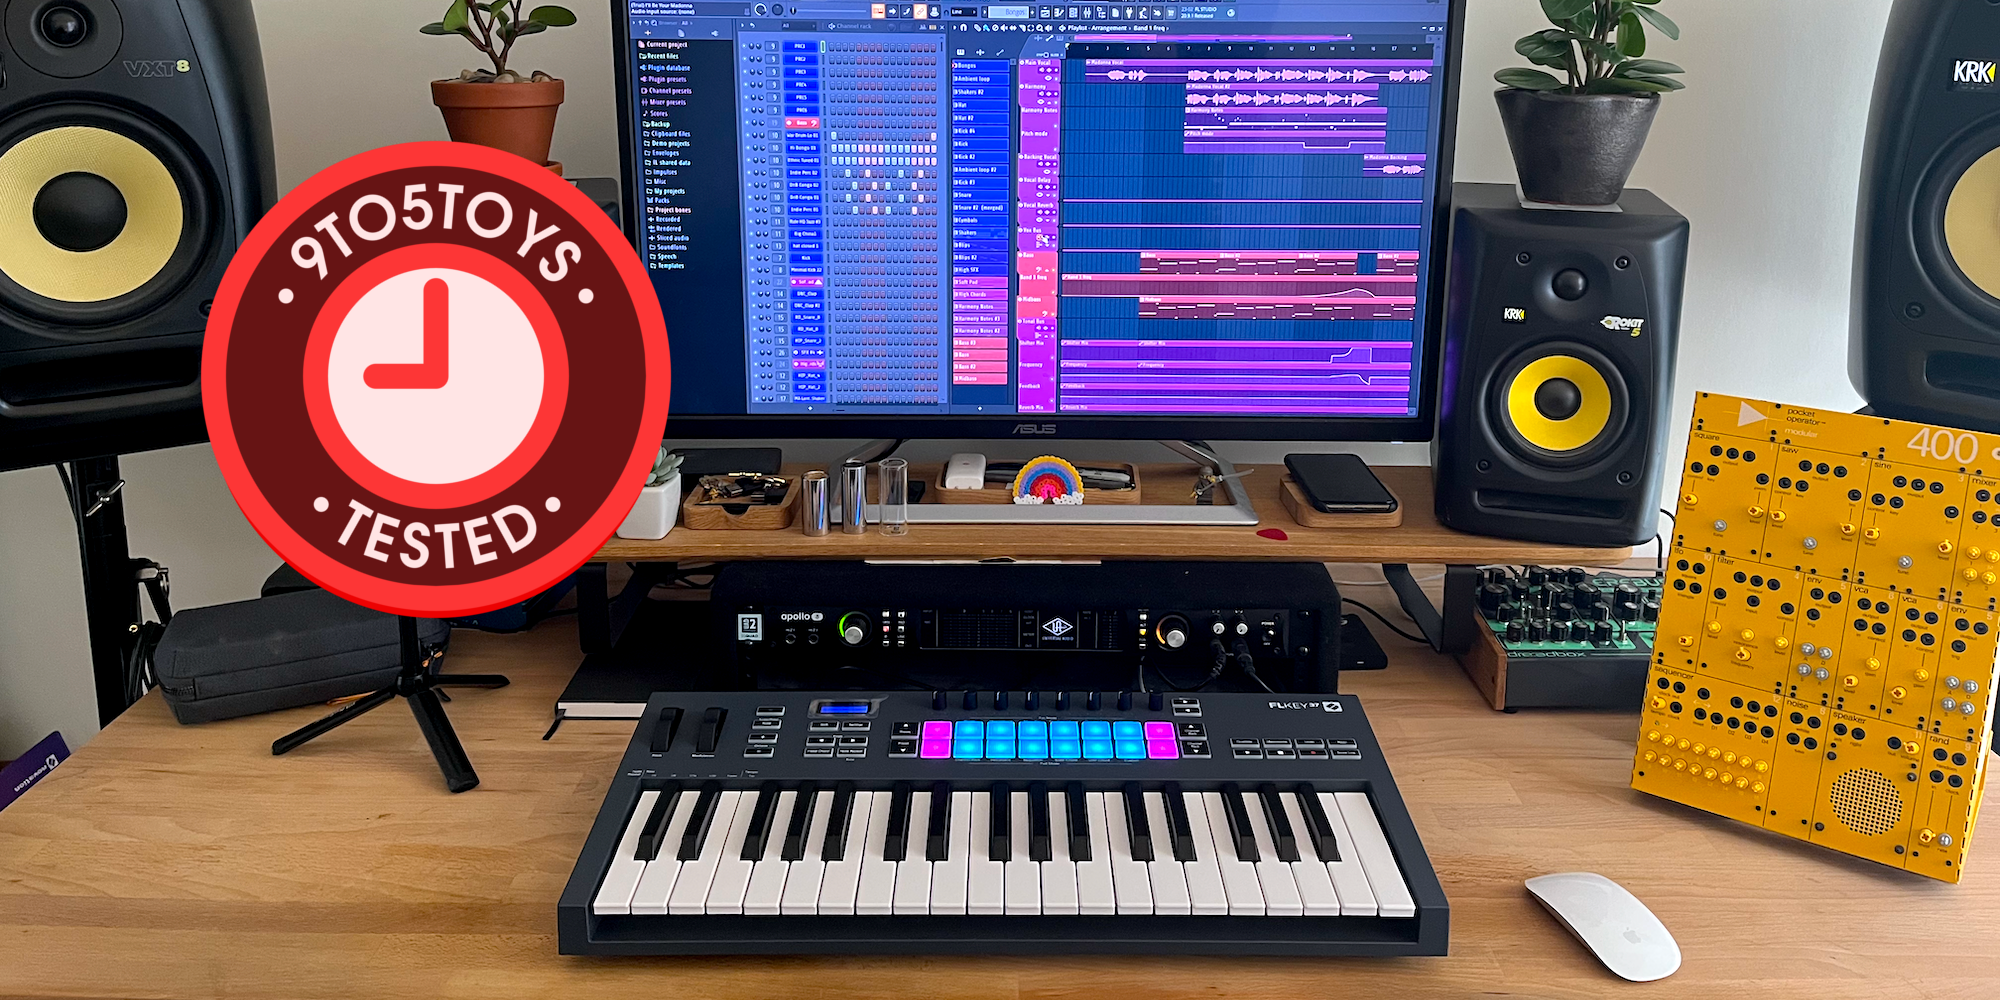 What Launchpad should I get for Logic Pro and Live Loops? - 9to5Mac